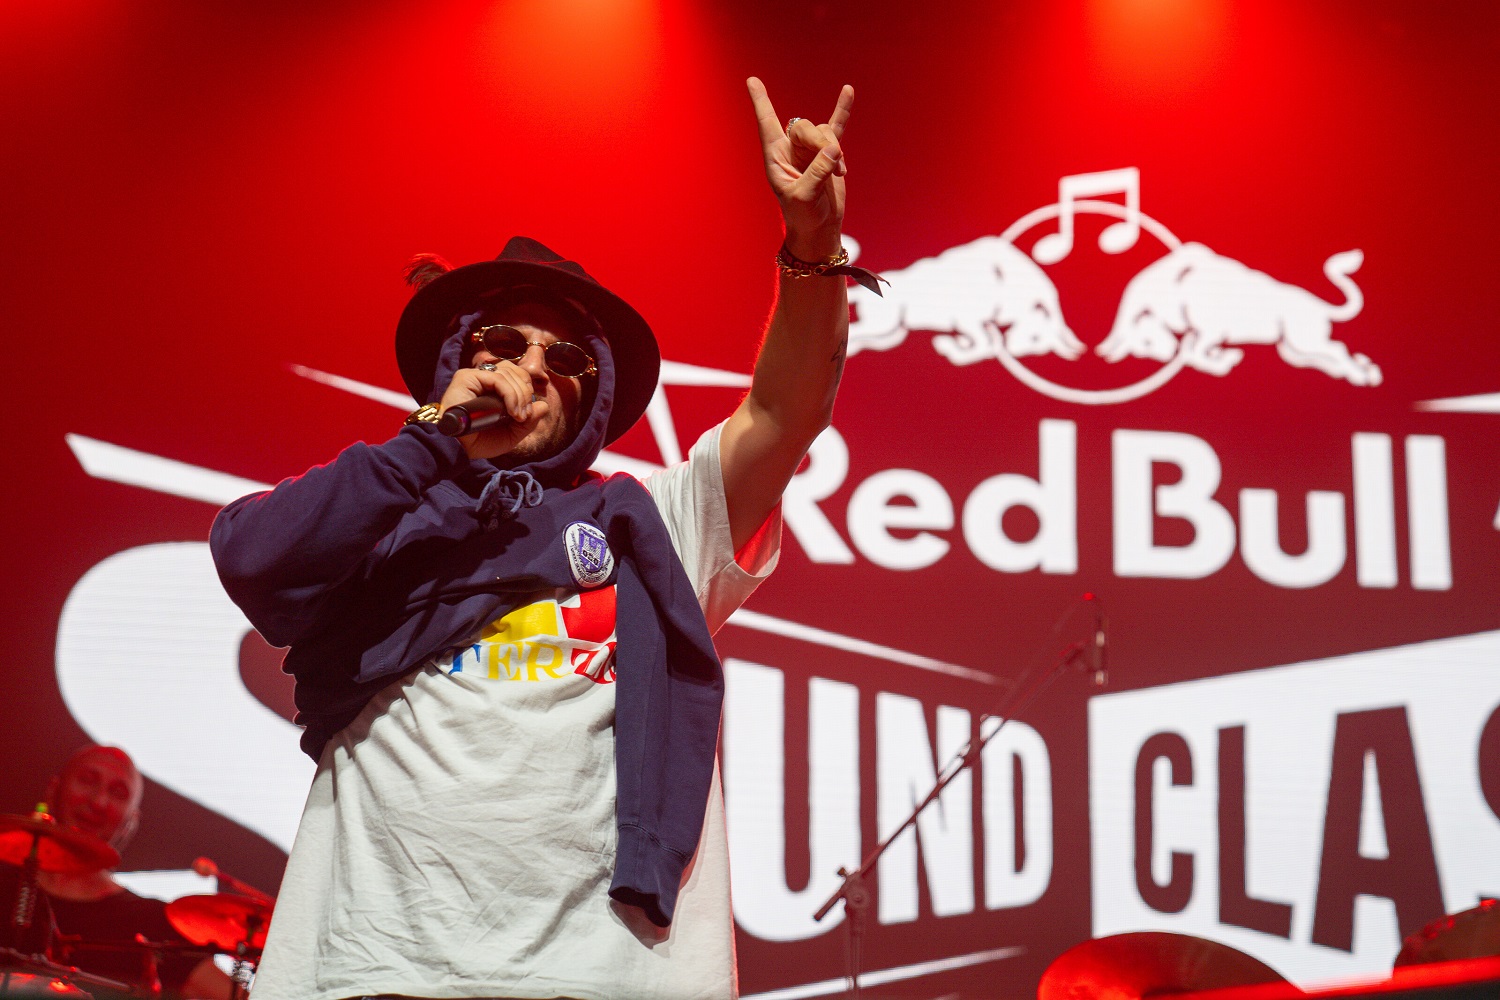 Macanache @Red Bull SoundClash 2019 by Mihnea Ratte